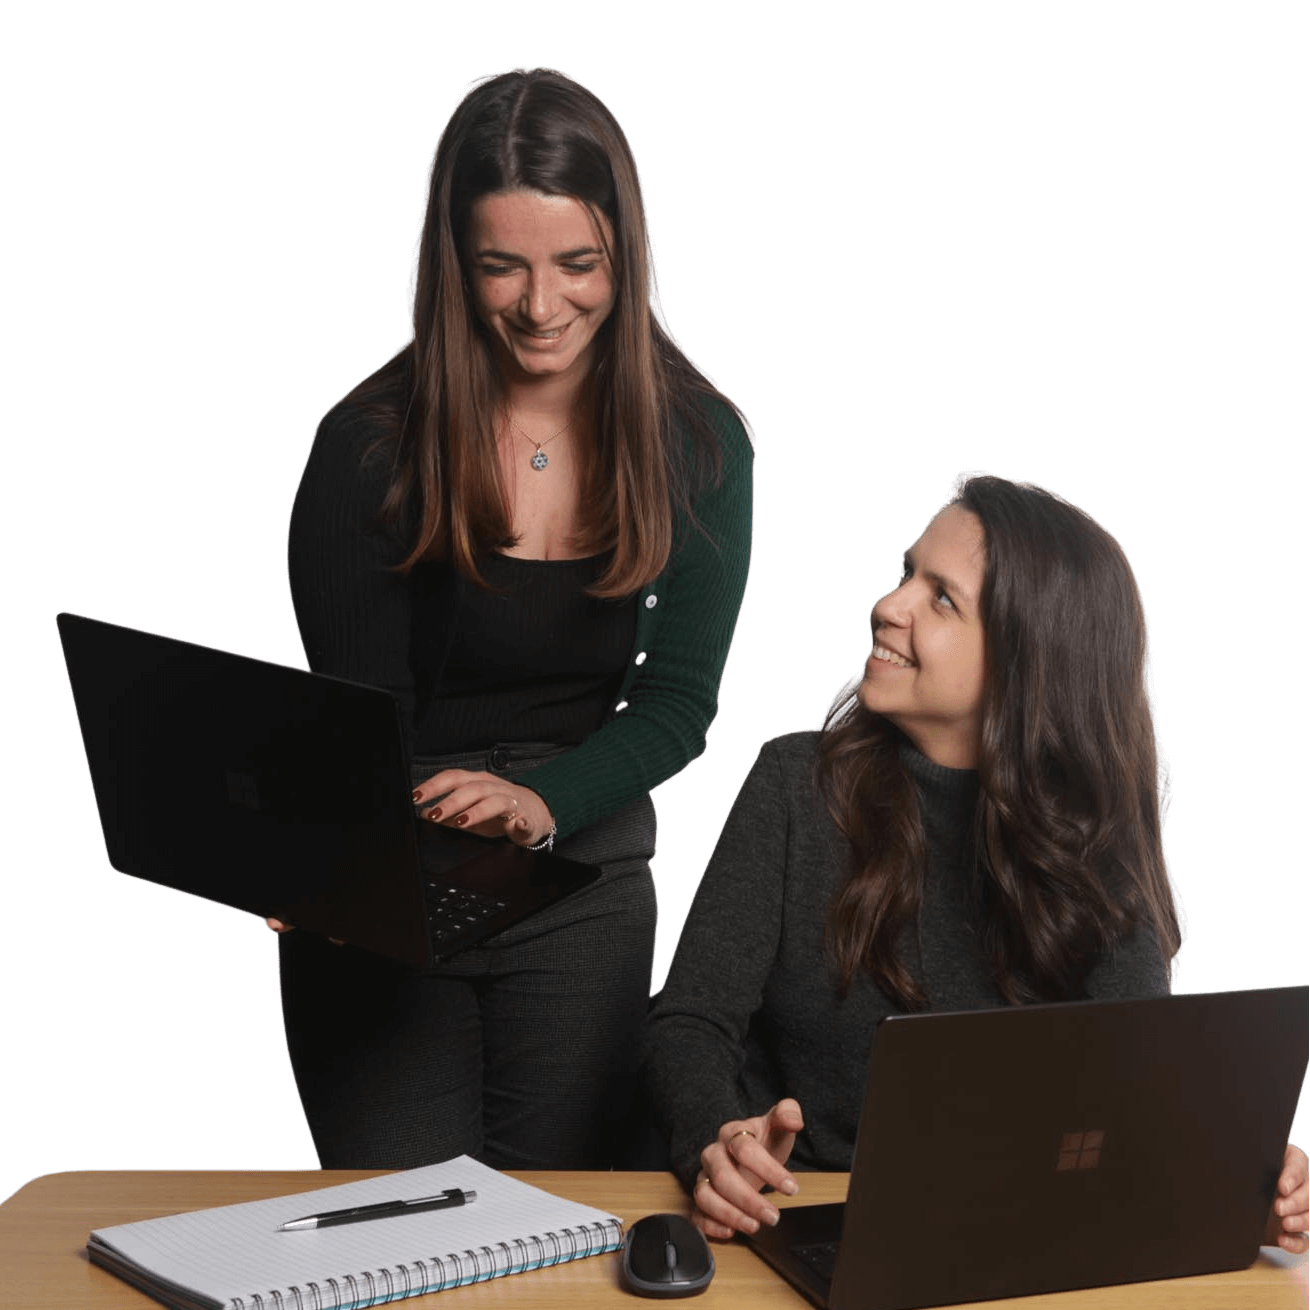 Two Global Lingo employees looking at a computer screen smiling